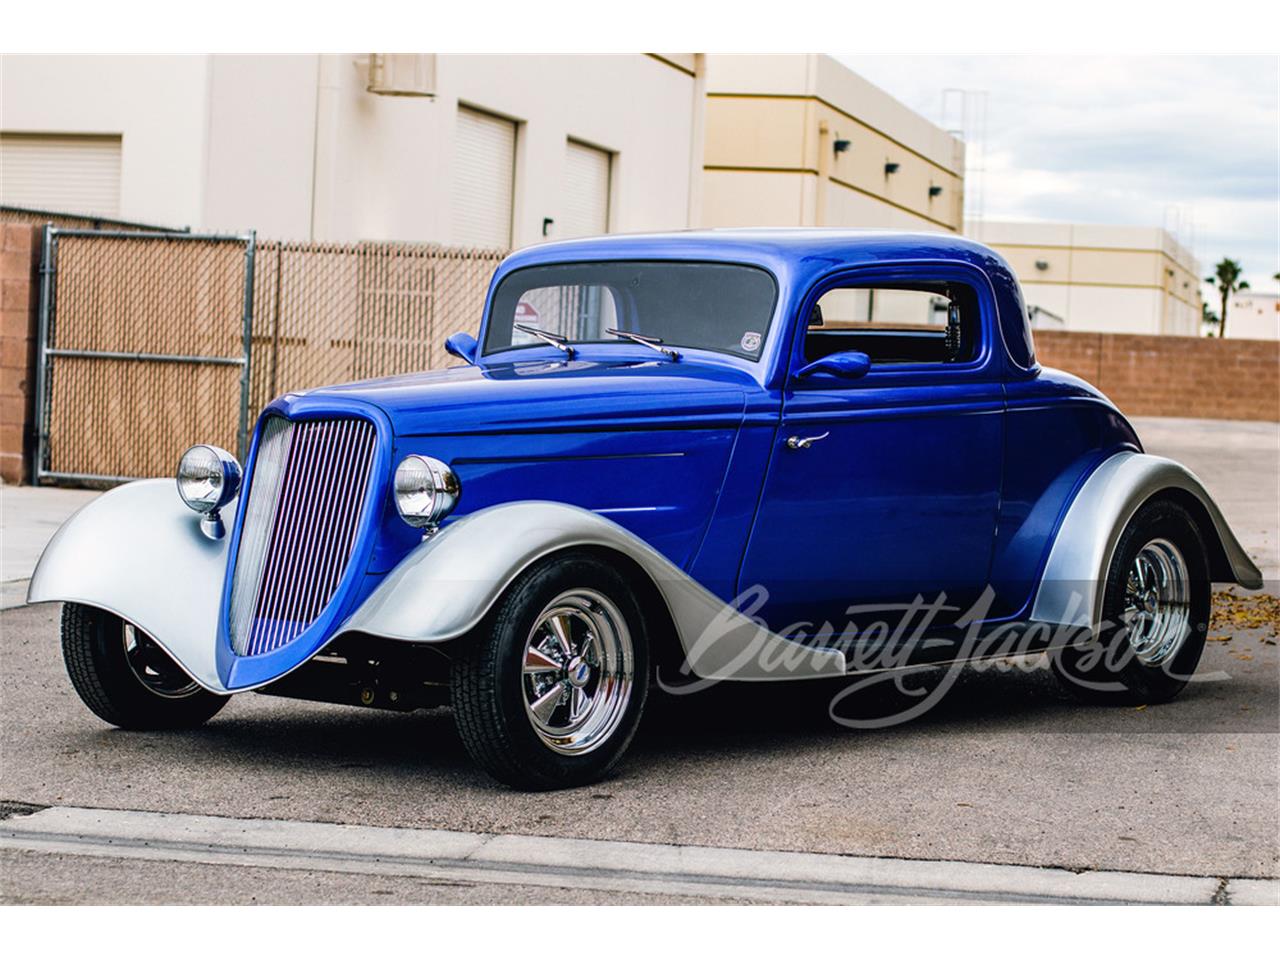 For Sale at Auction: 1934 Ford Custom in Scottsdale, Arizona for sale in Scottsdale, AZ